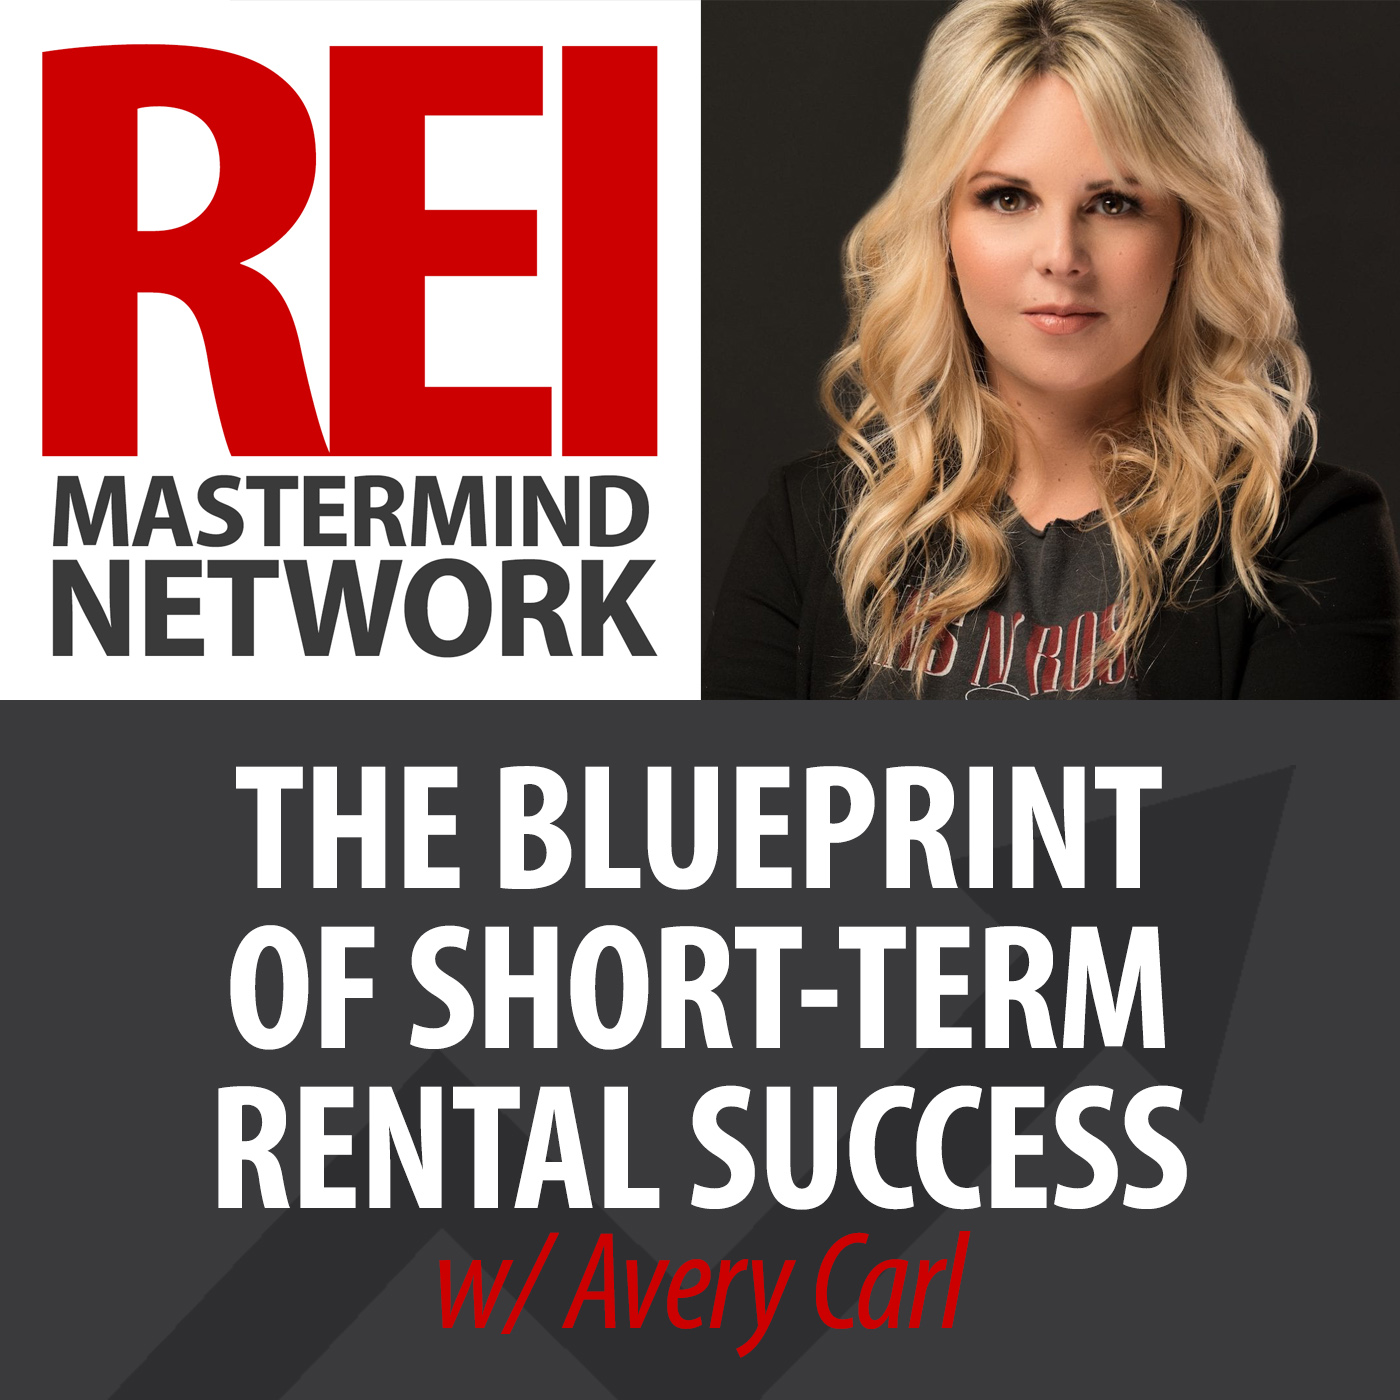 The Blueprint of Short-Term Rental Success with Avery Carl Image